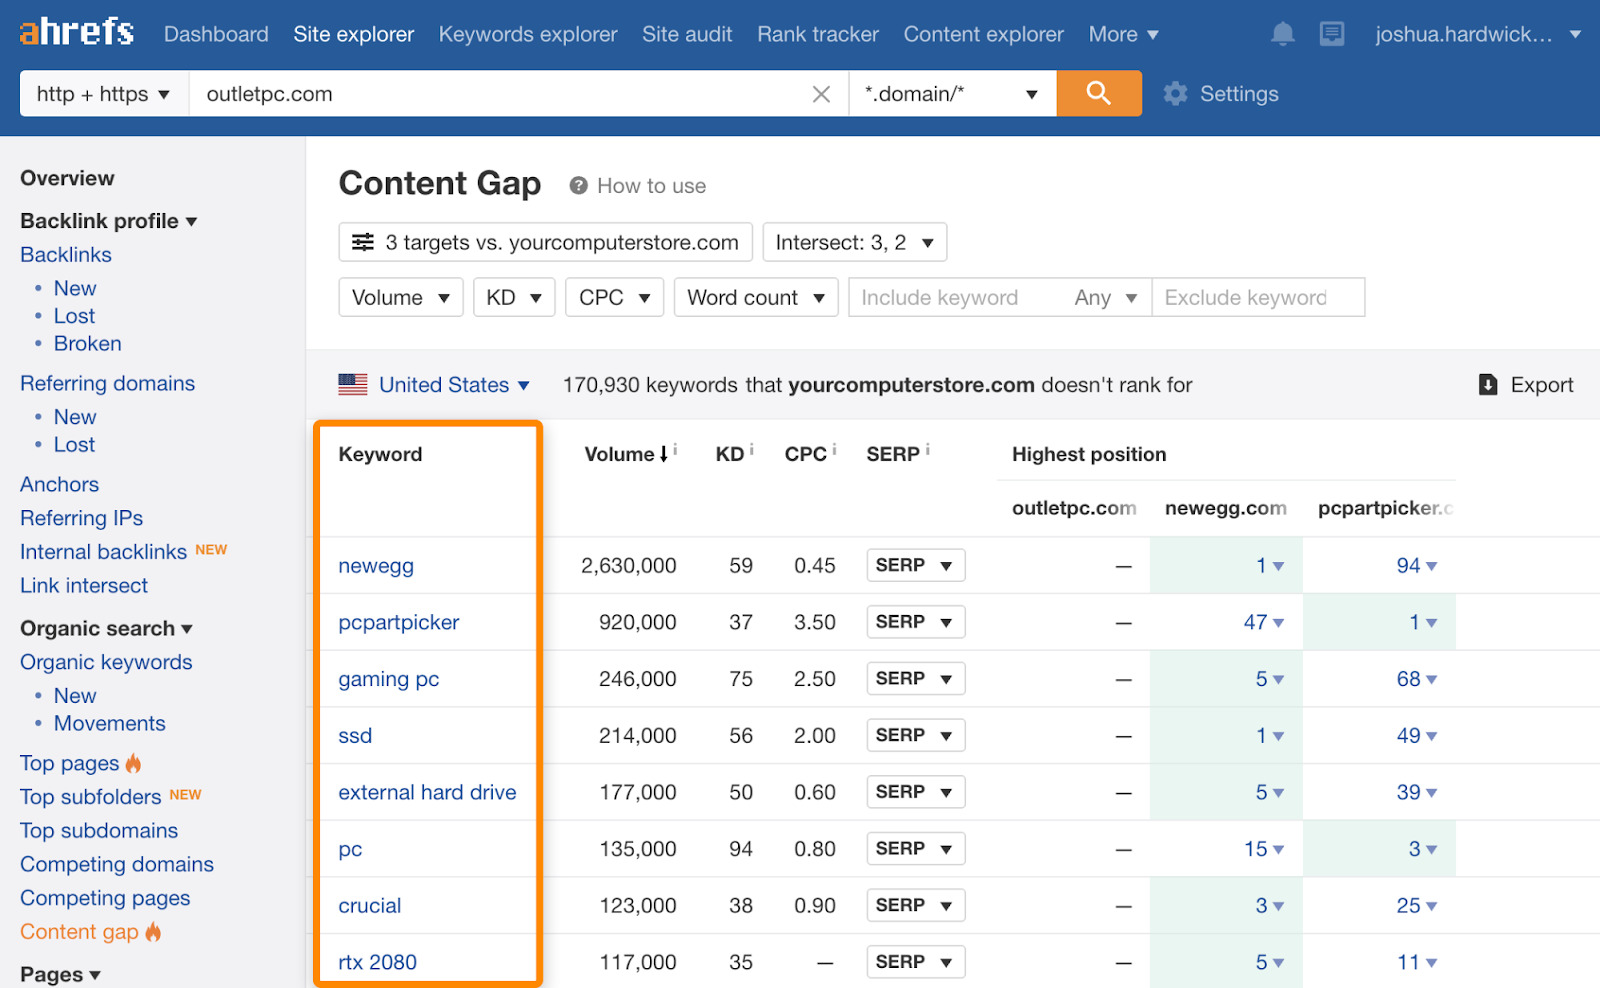 8 content gap results